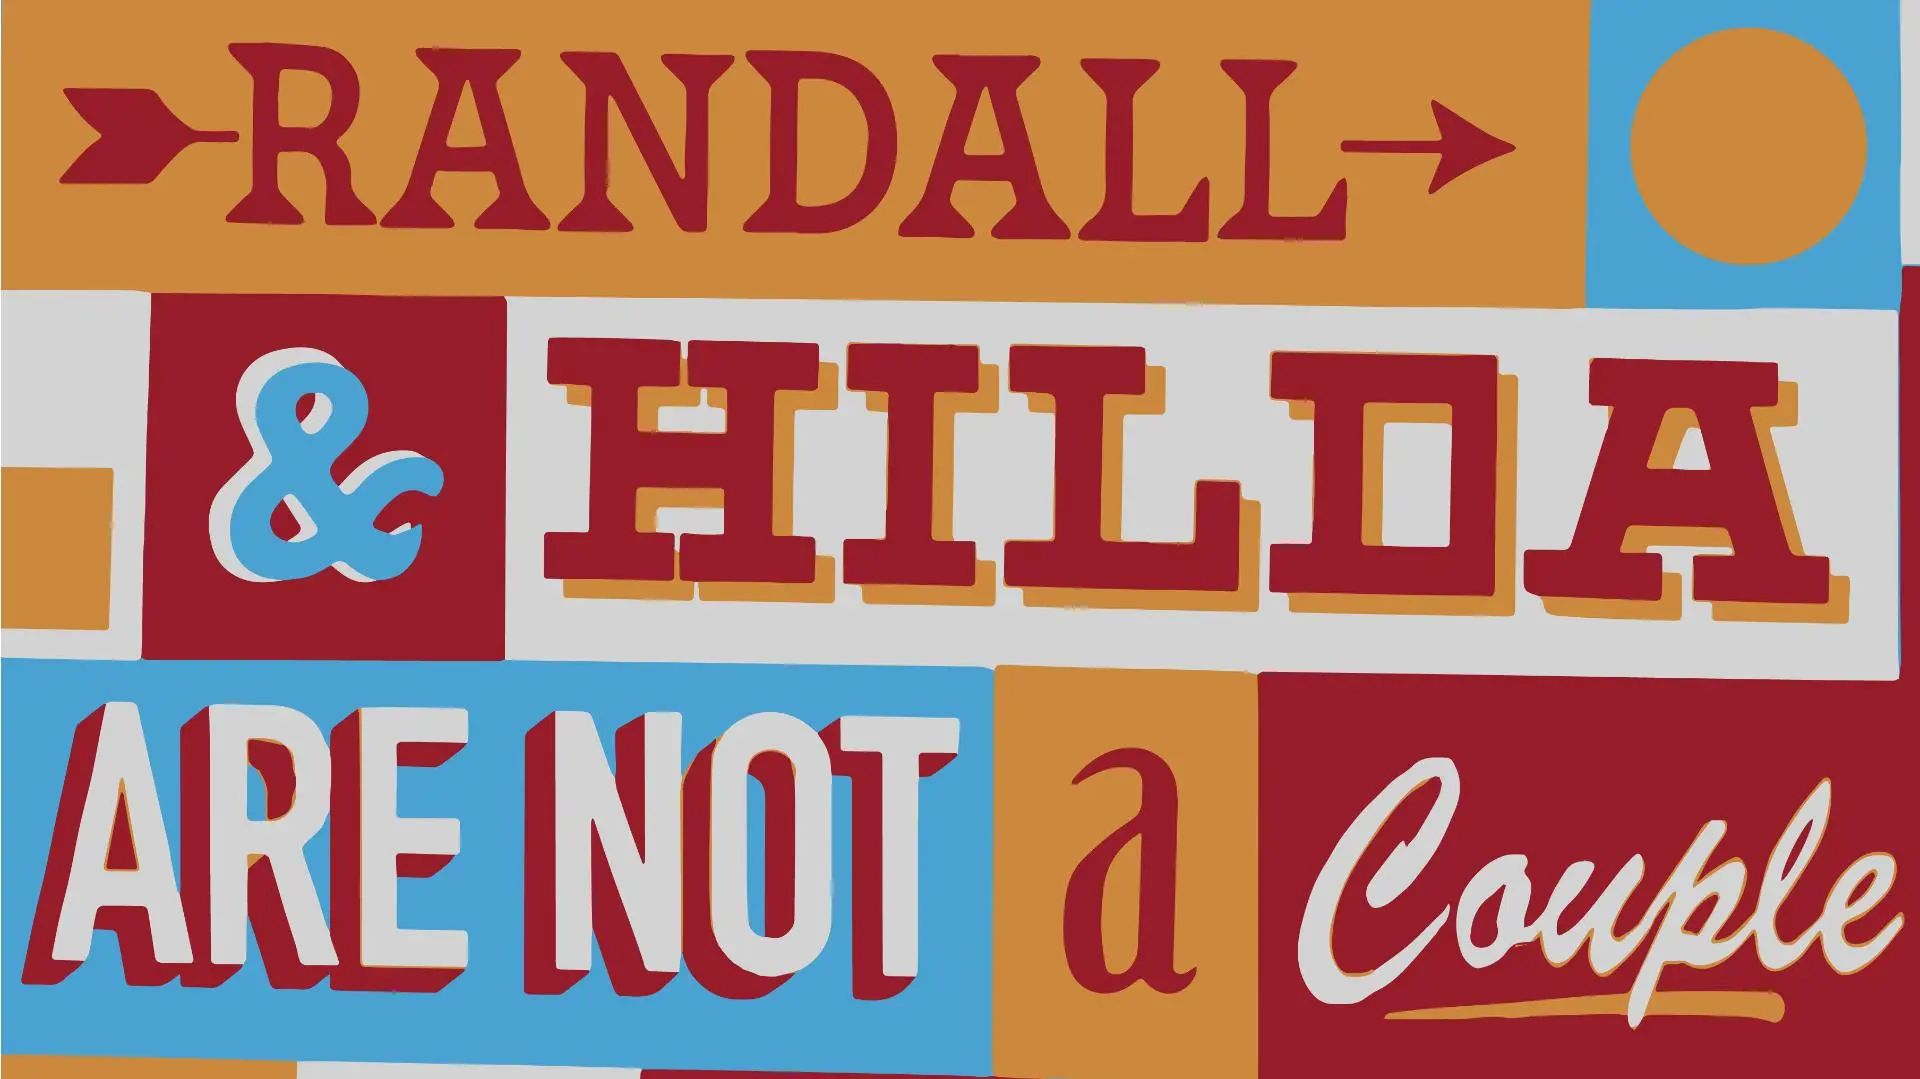 Randall and Hilda Are Not a Couple_peliplat